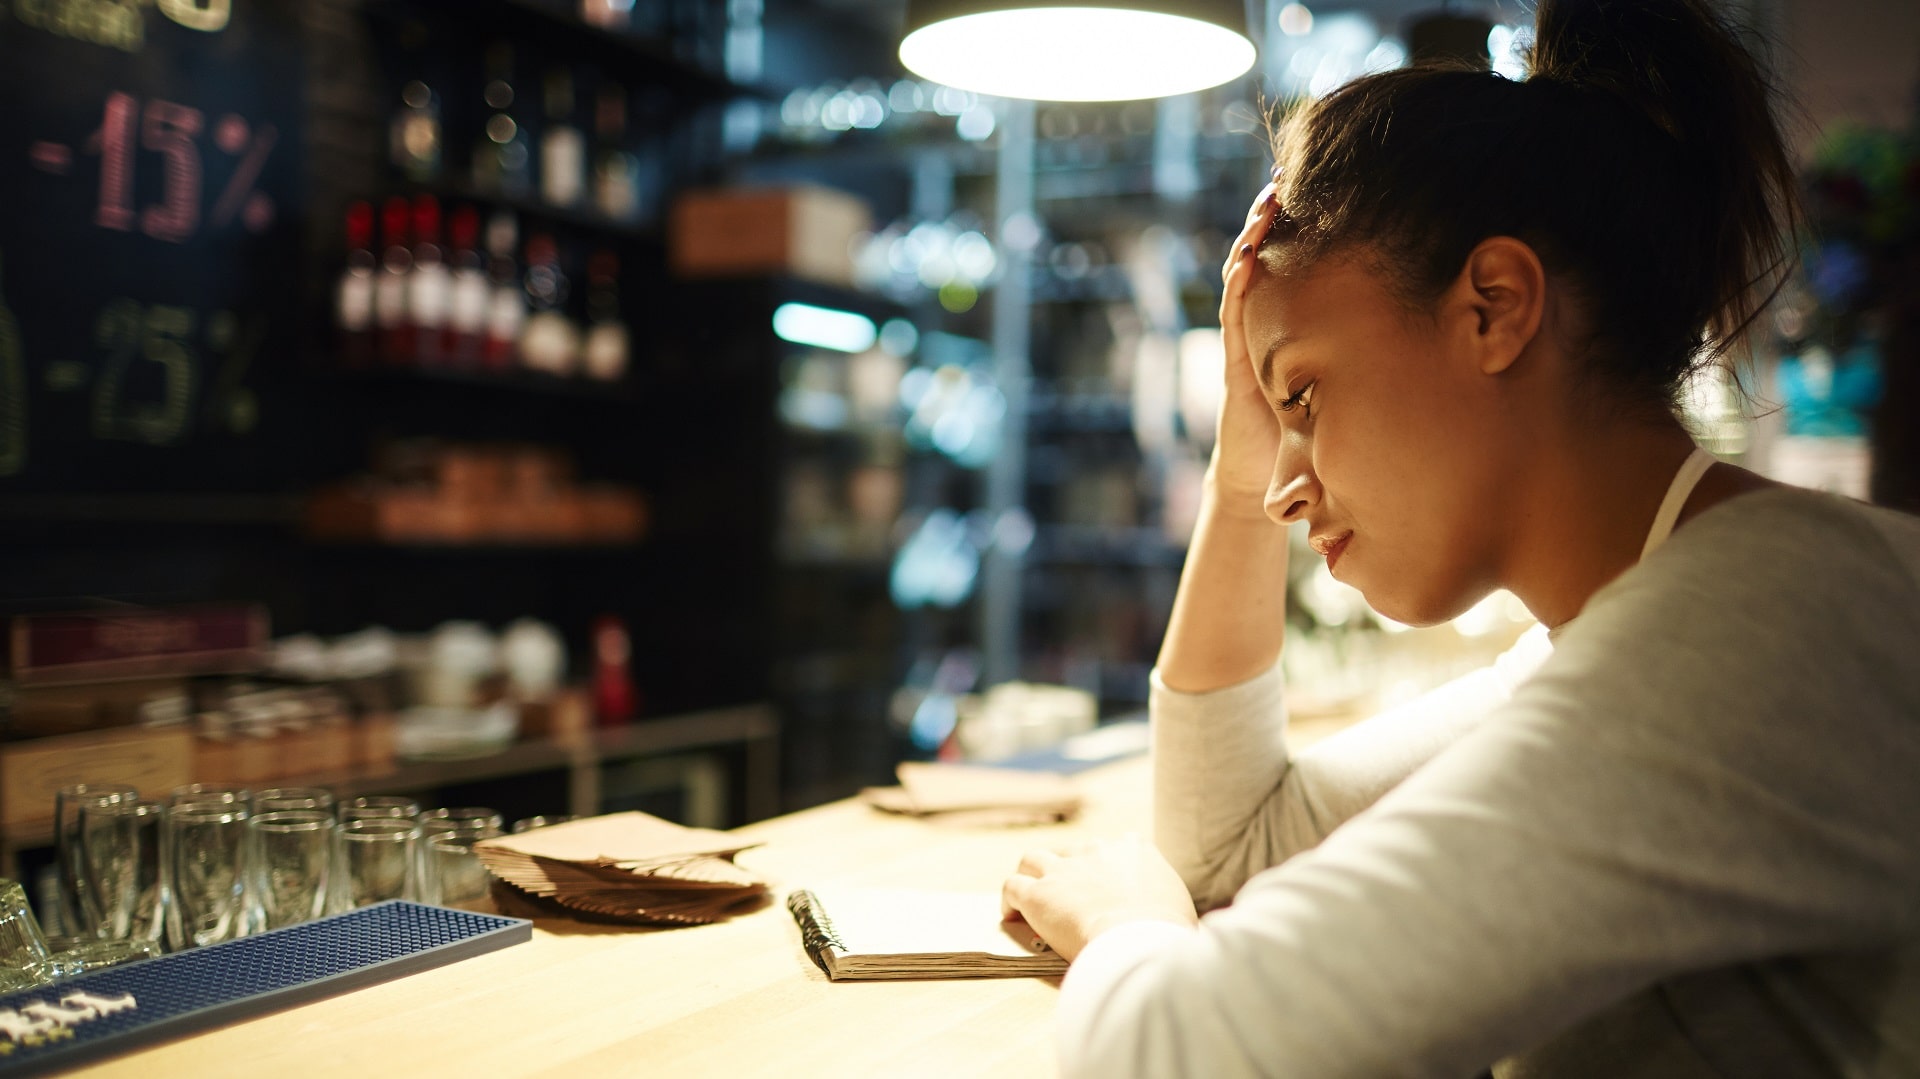 Woman in restaurant appears stressed at work